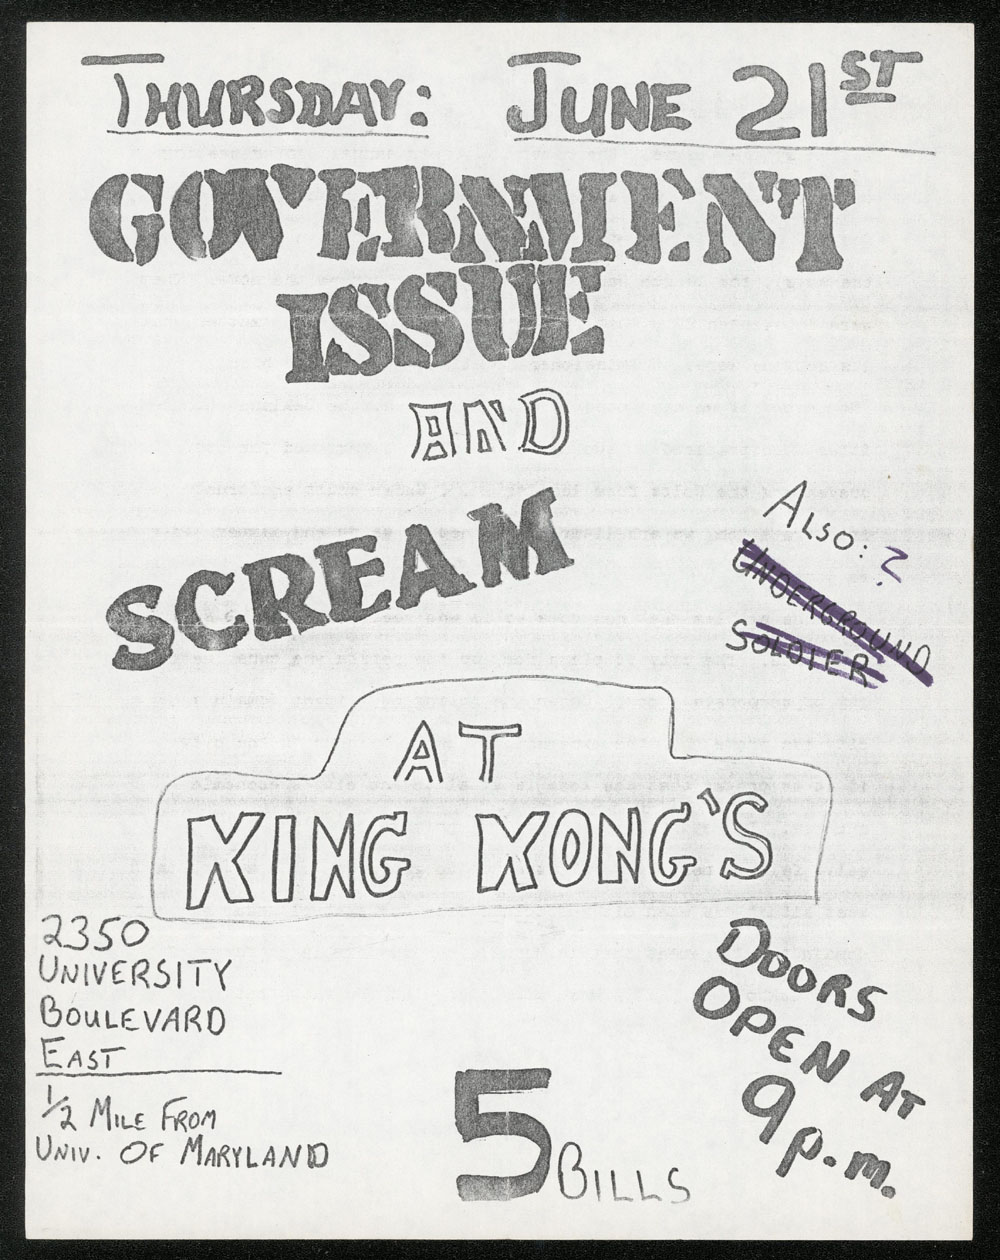 GOVERNMENT ISSUE w/ Scream at King Kong's